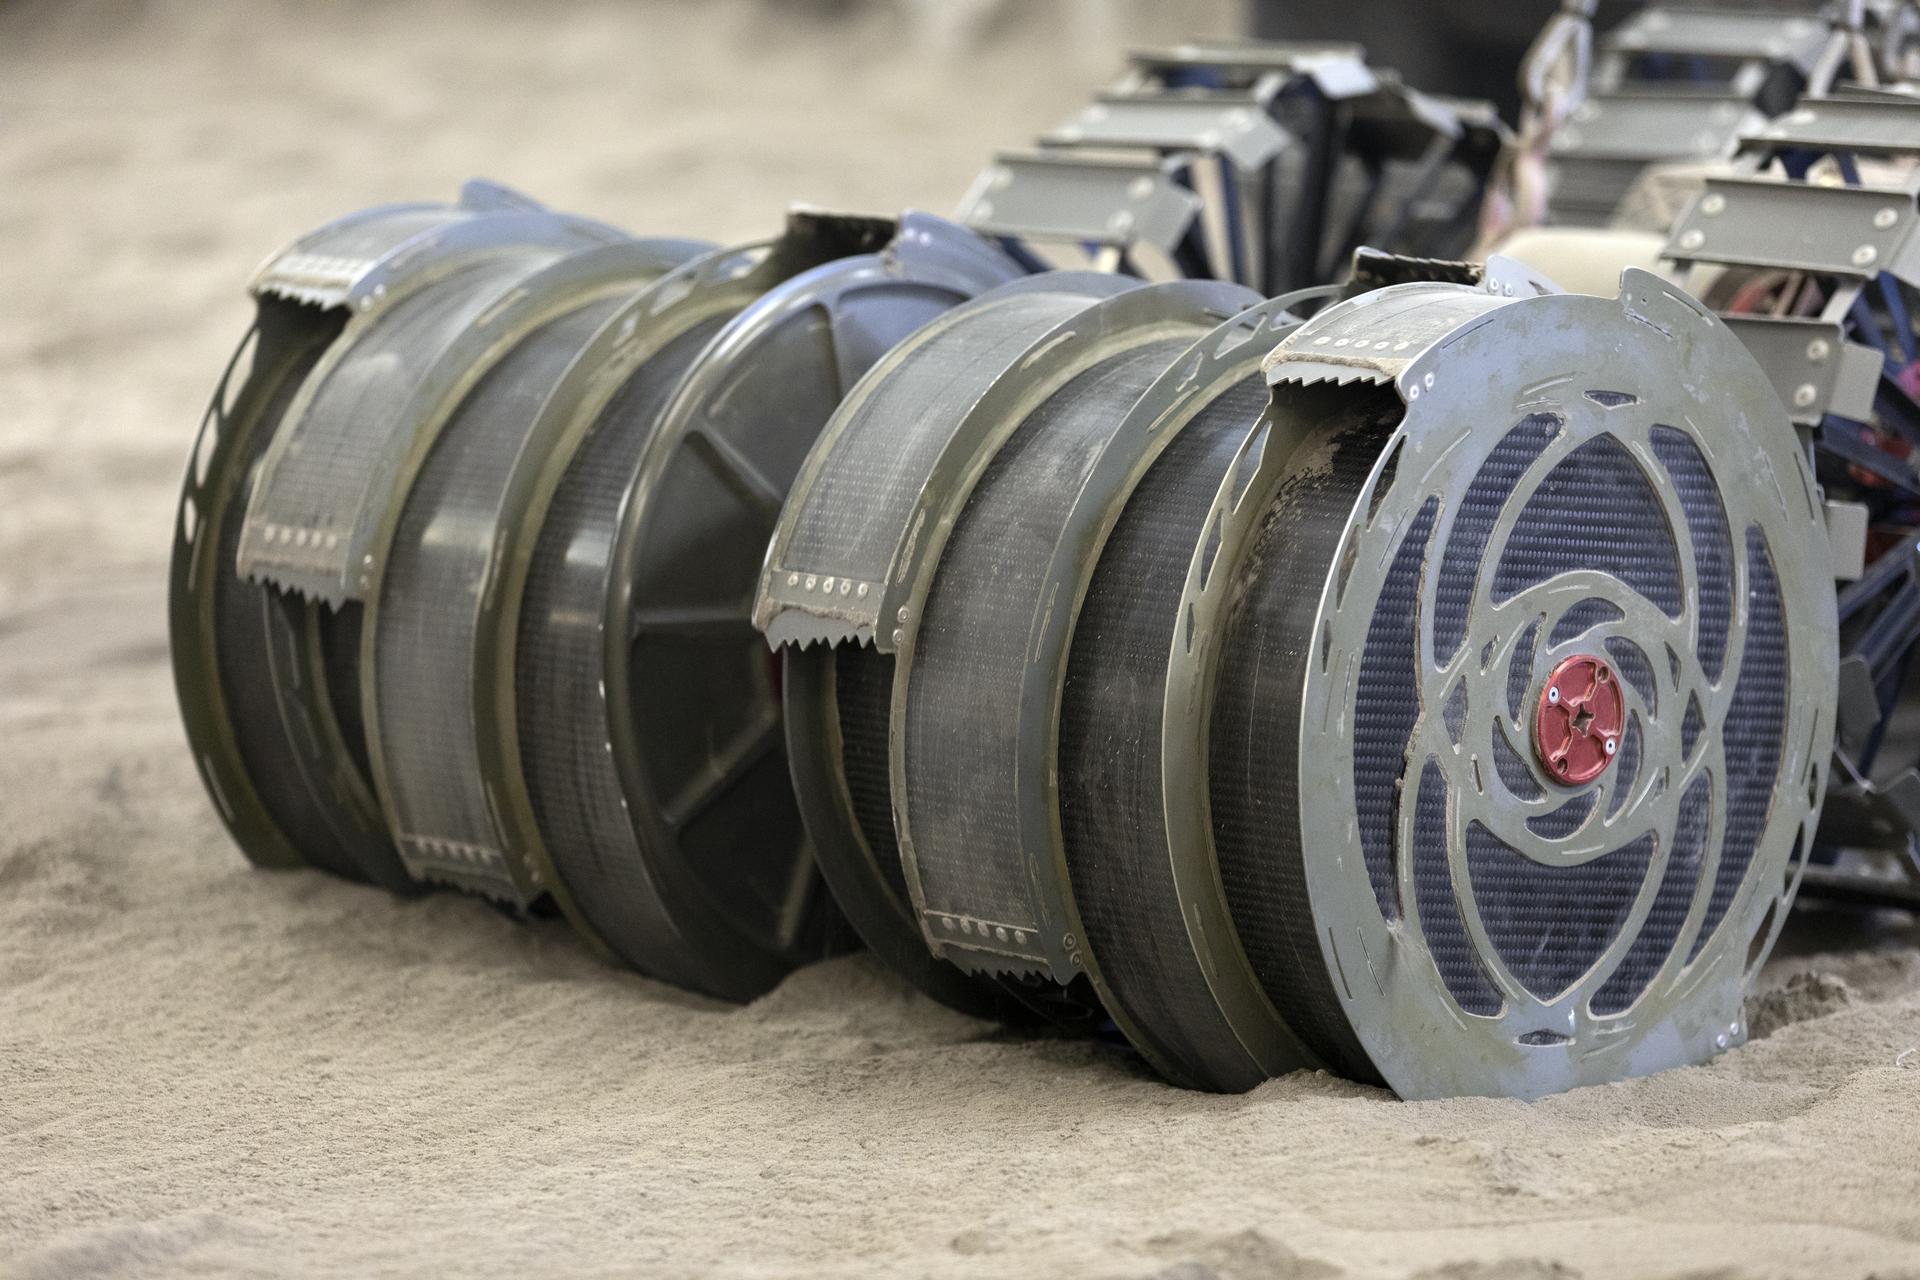 A close-up view of the bucket drums on Regolith Advanced Surface Systems Operations Robot (RASSOR).